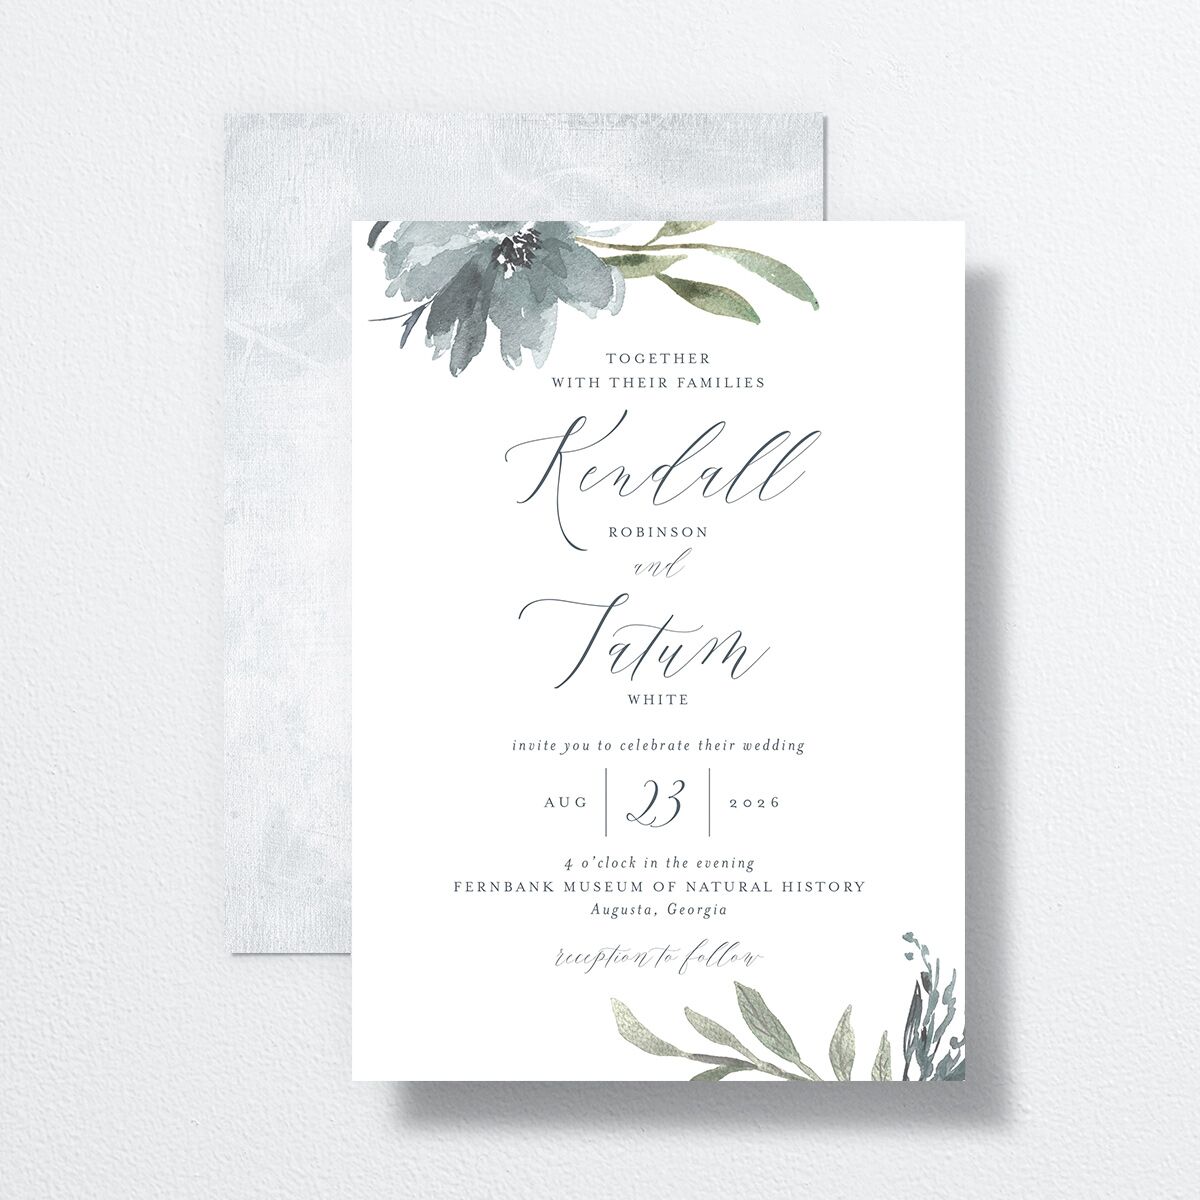 Muted Floral Wedding Invitations front-and-back in blue